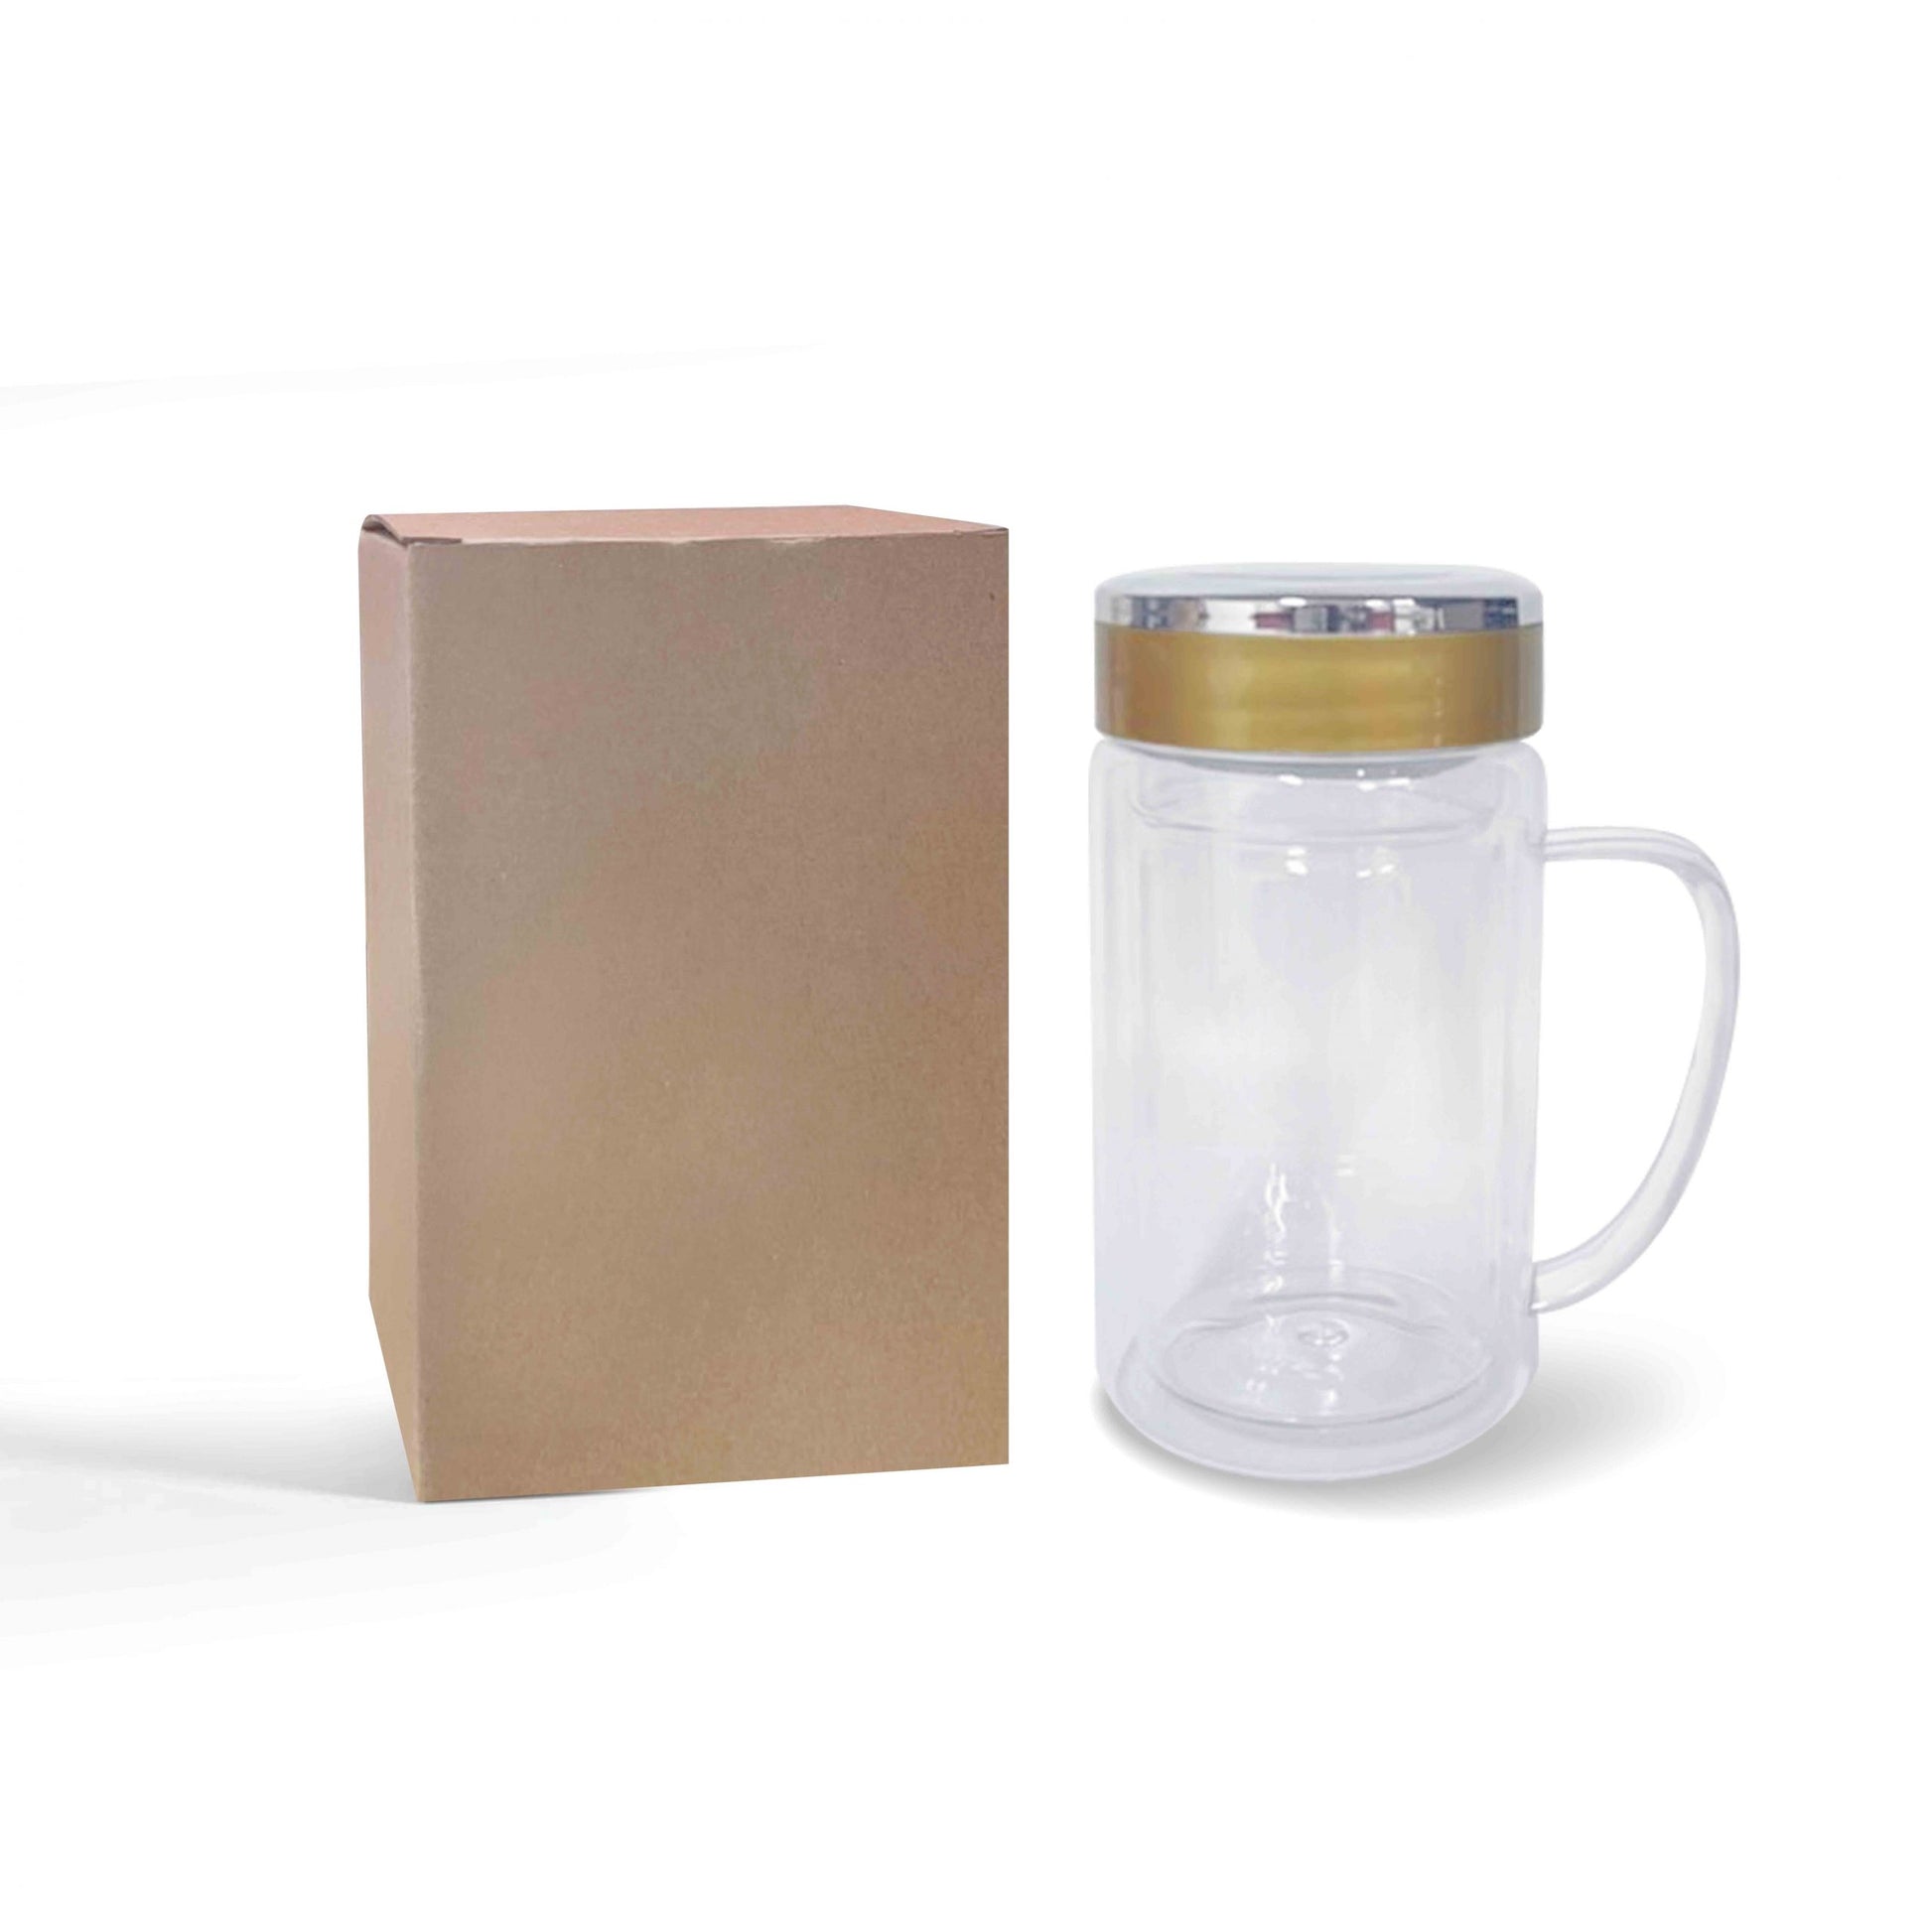 A nice looking double wall glass mug with packaging for corporate merchandise